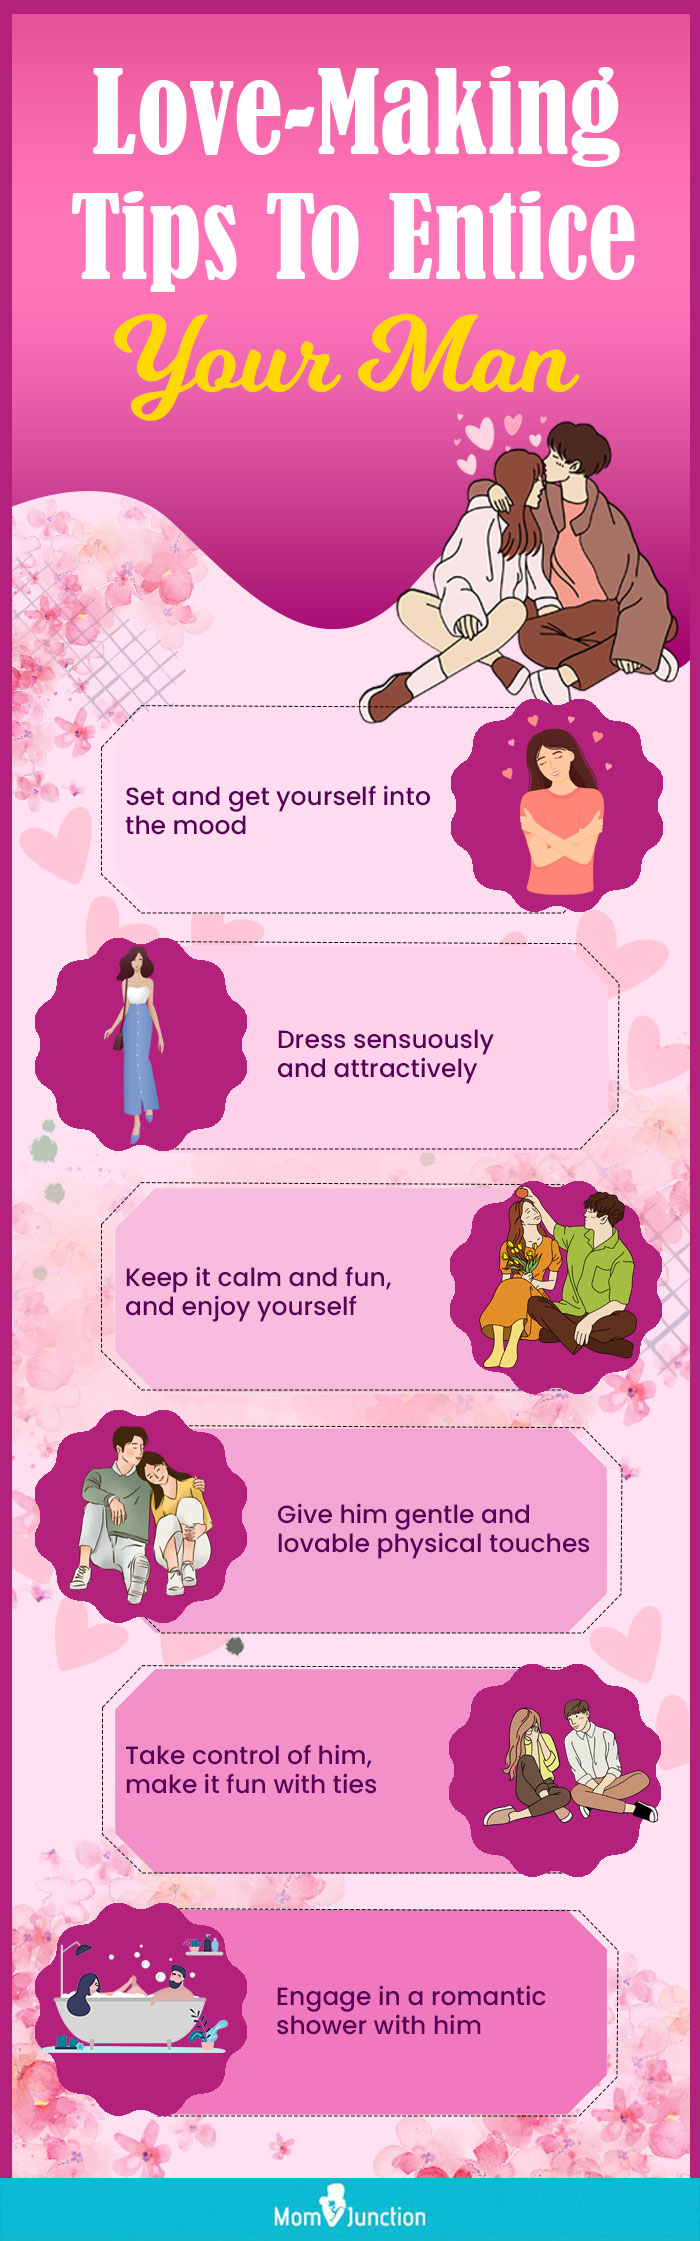 love making tips to entice your man [infographic]